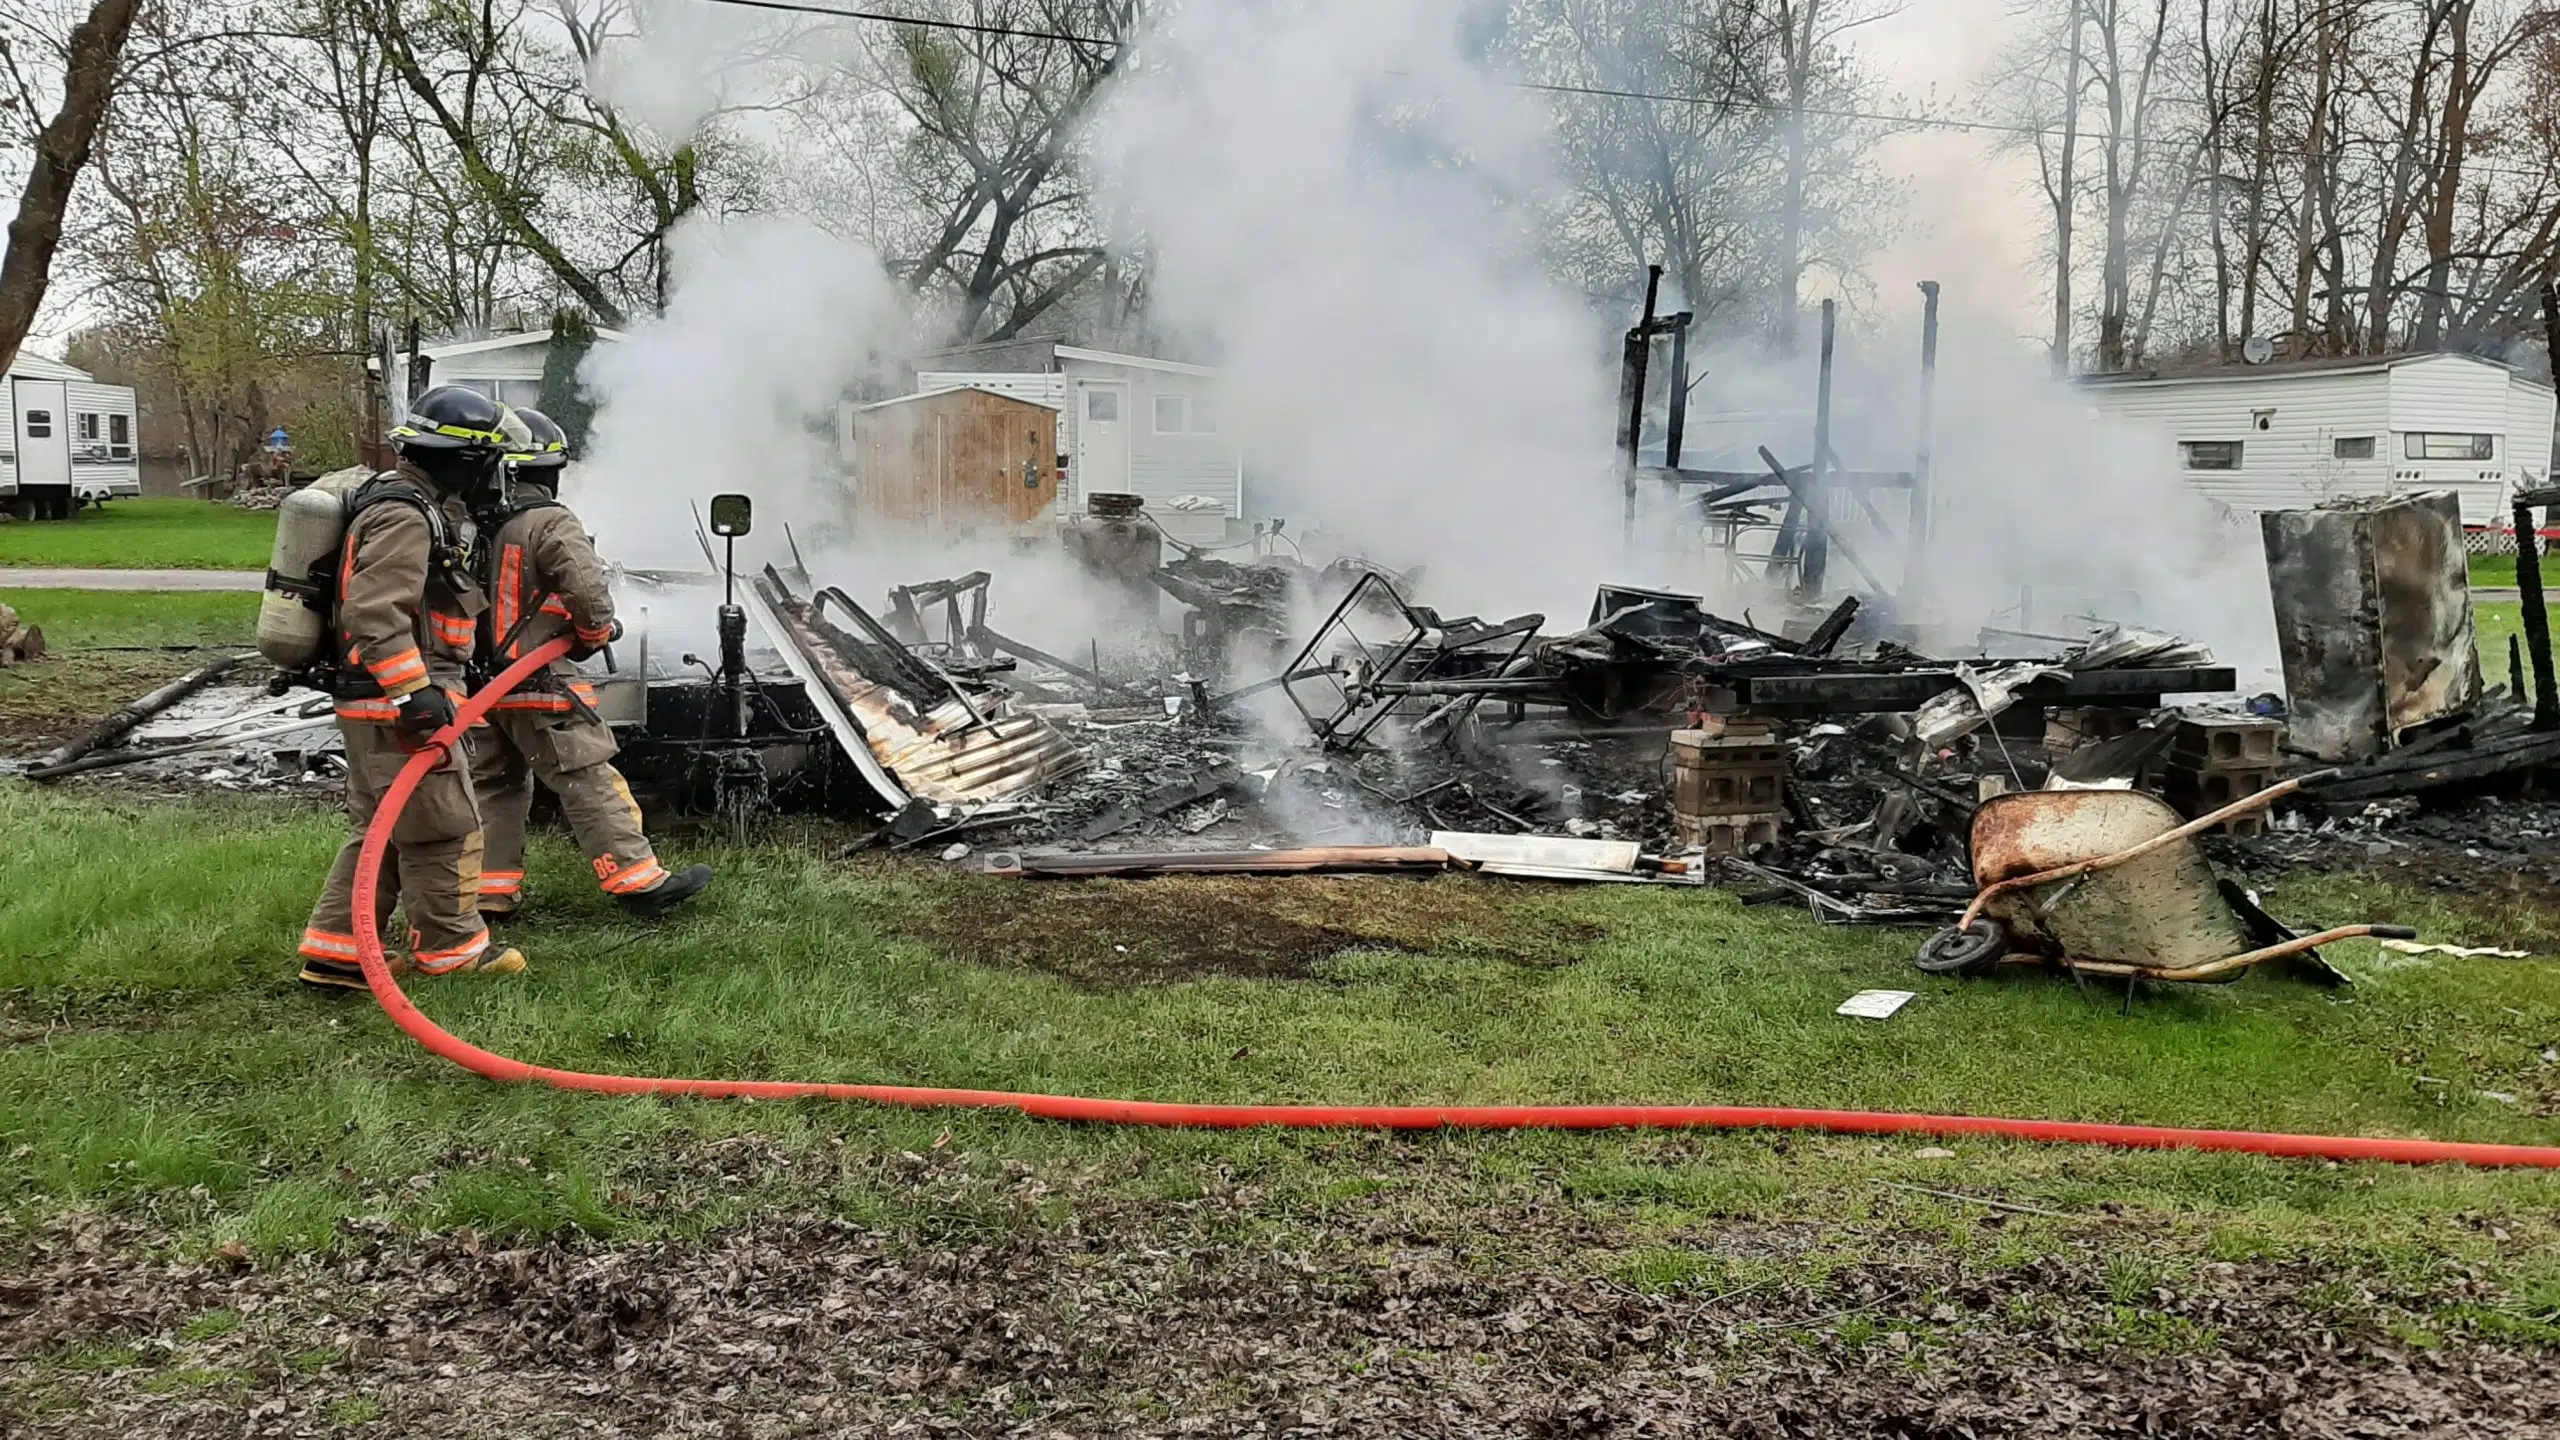 Woman suffers second degree burns in morning RV park fire